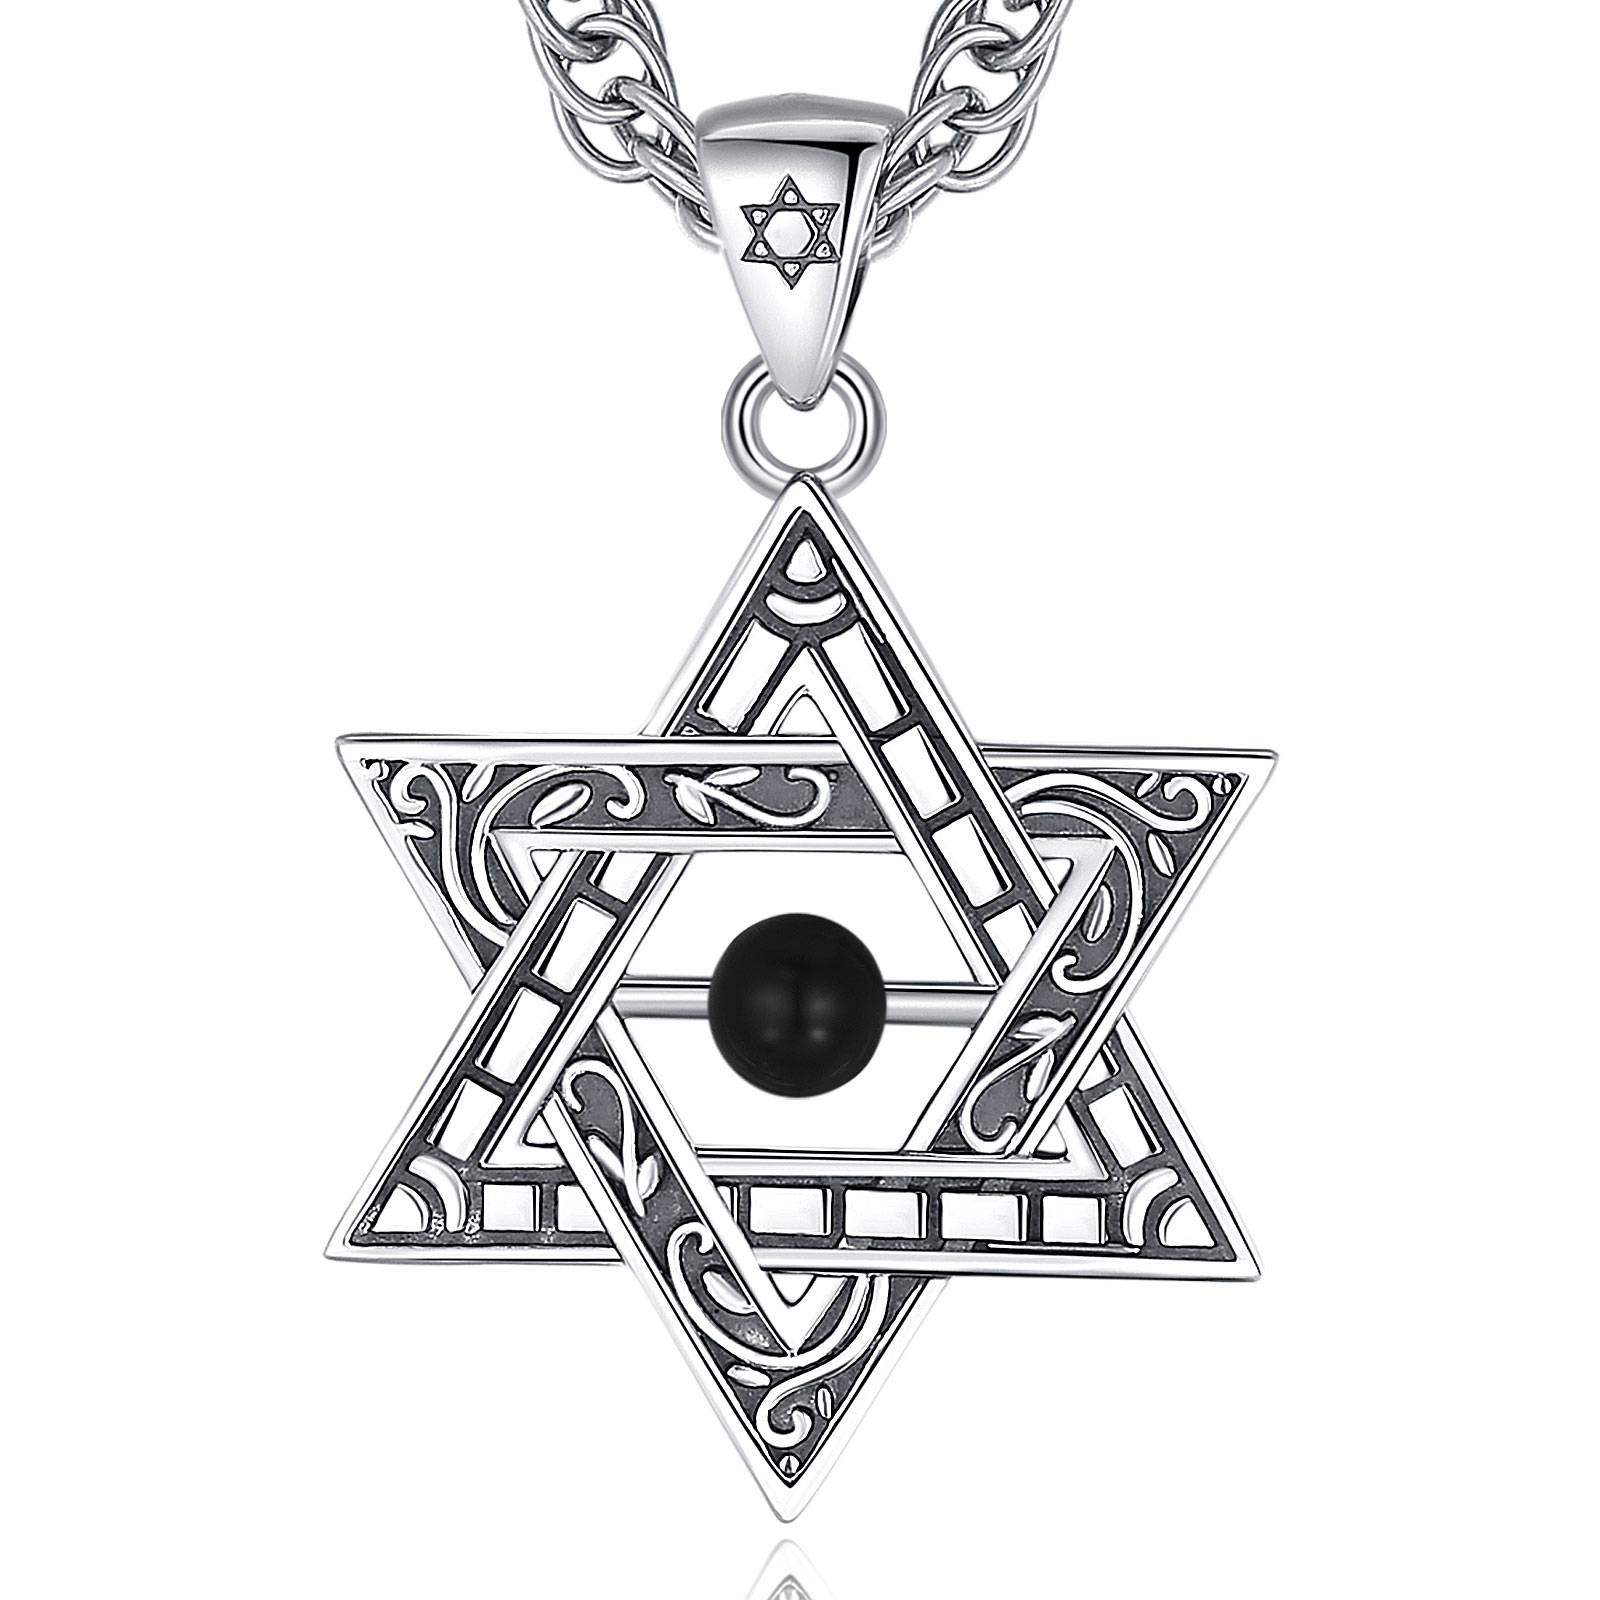 925 Sterling Silver Star of David Pendant Necklace for Men or Women by Merryshine Jewelry